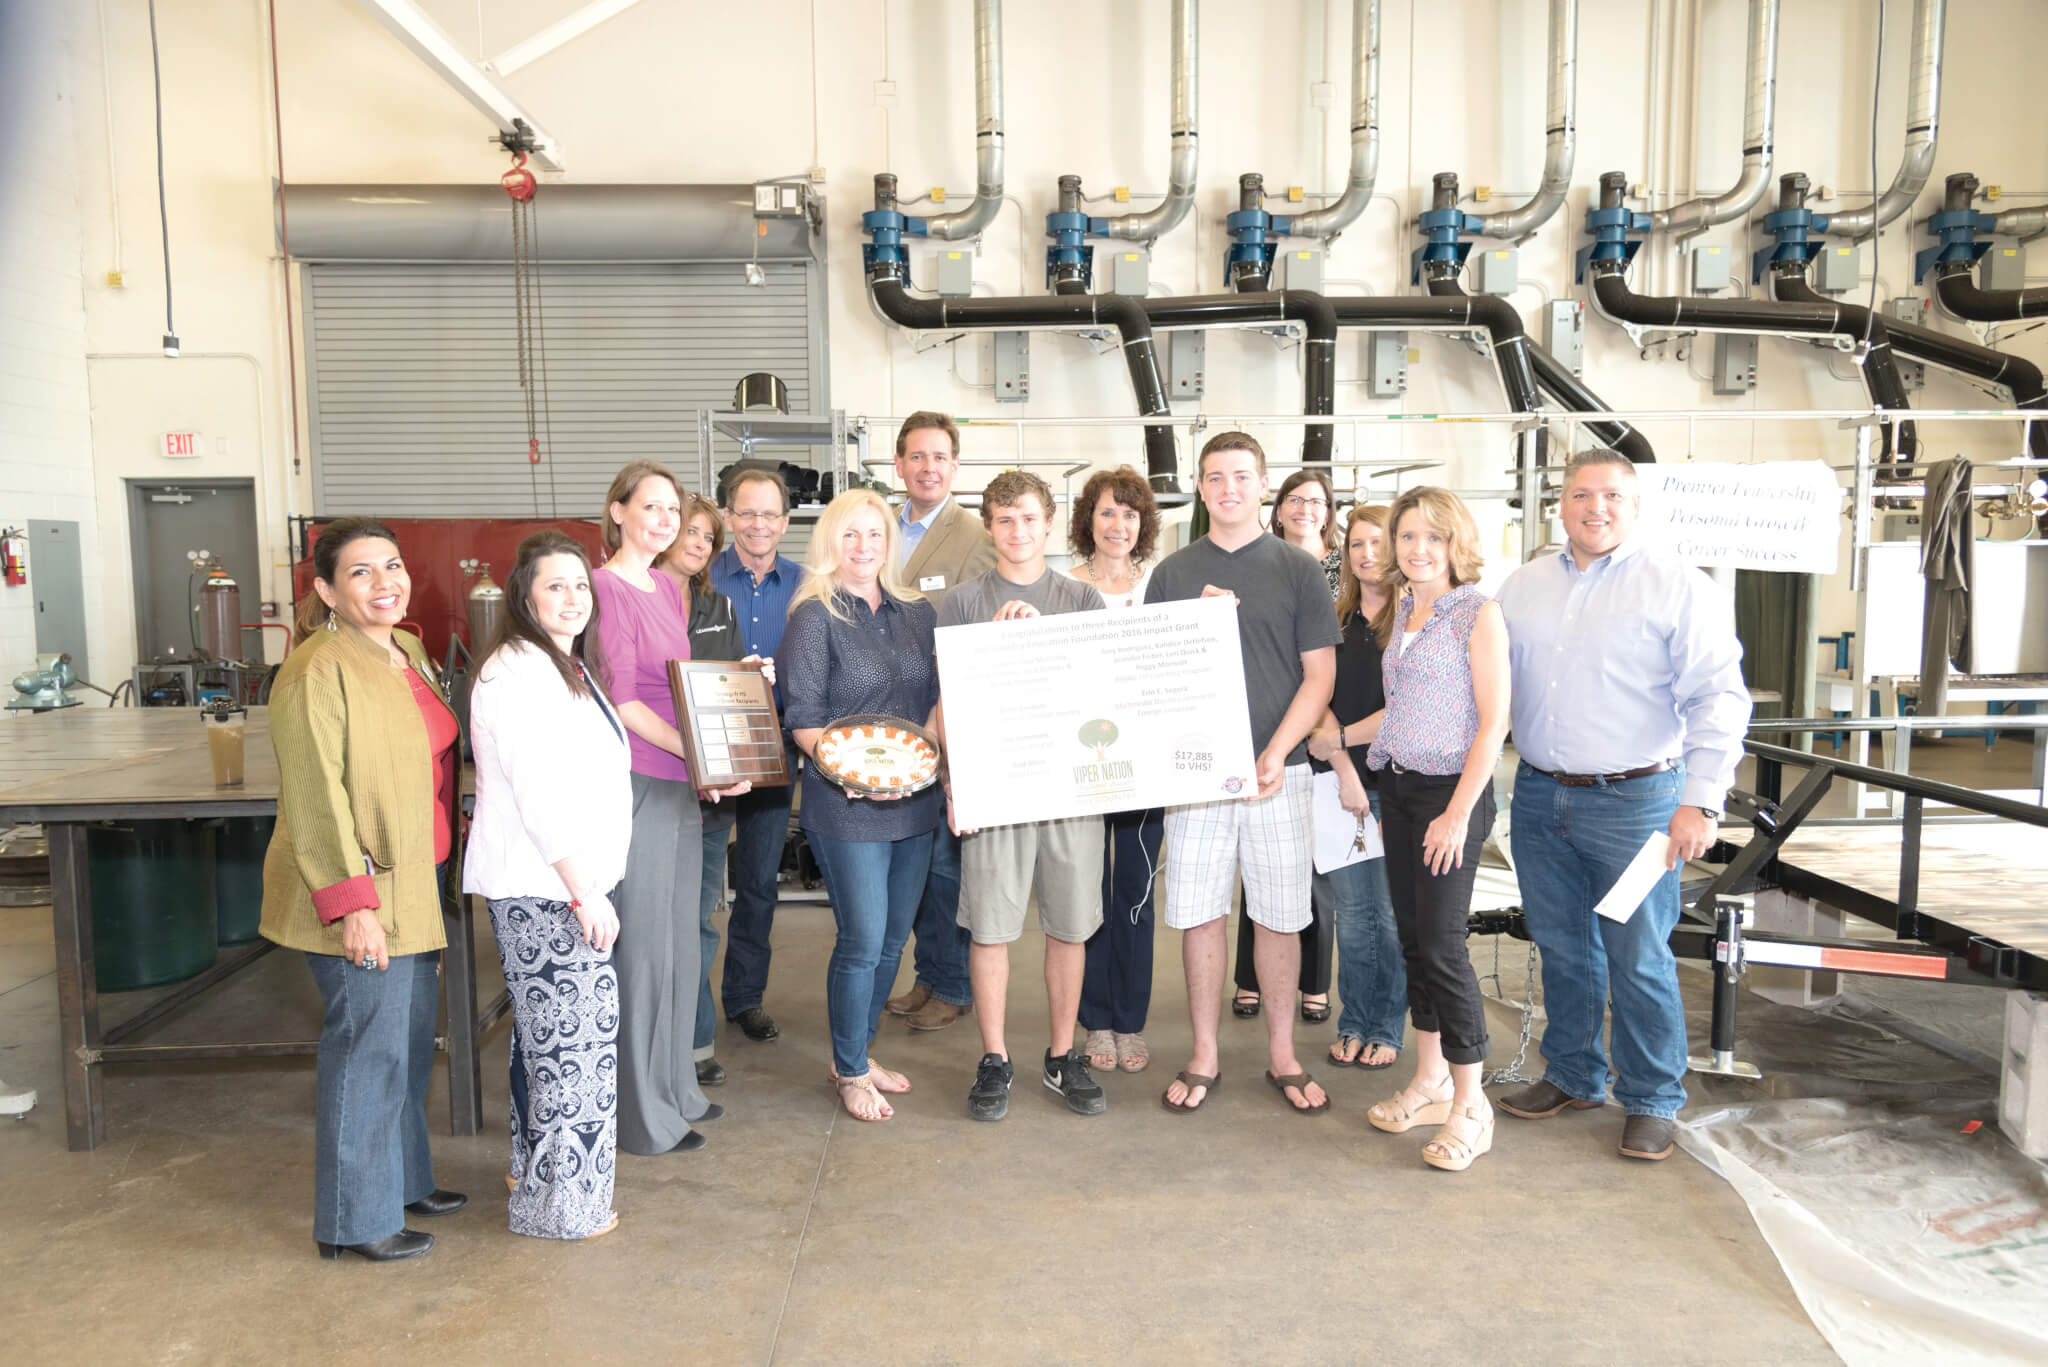 Joe Lemmons, Vandegrift agriculture science teacher, received $5,000 to purchase equipment from the Hill Country Education Foundation grant patrol.